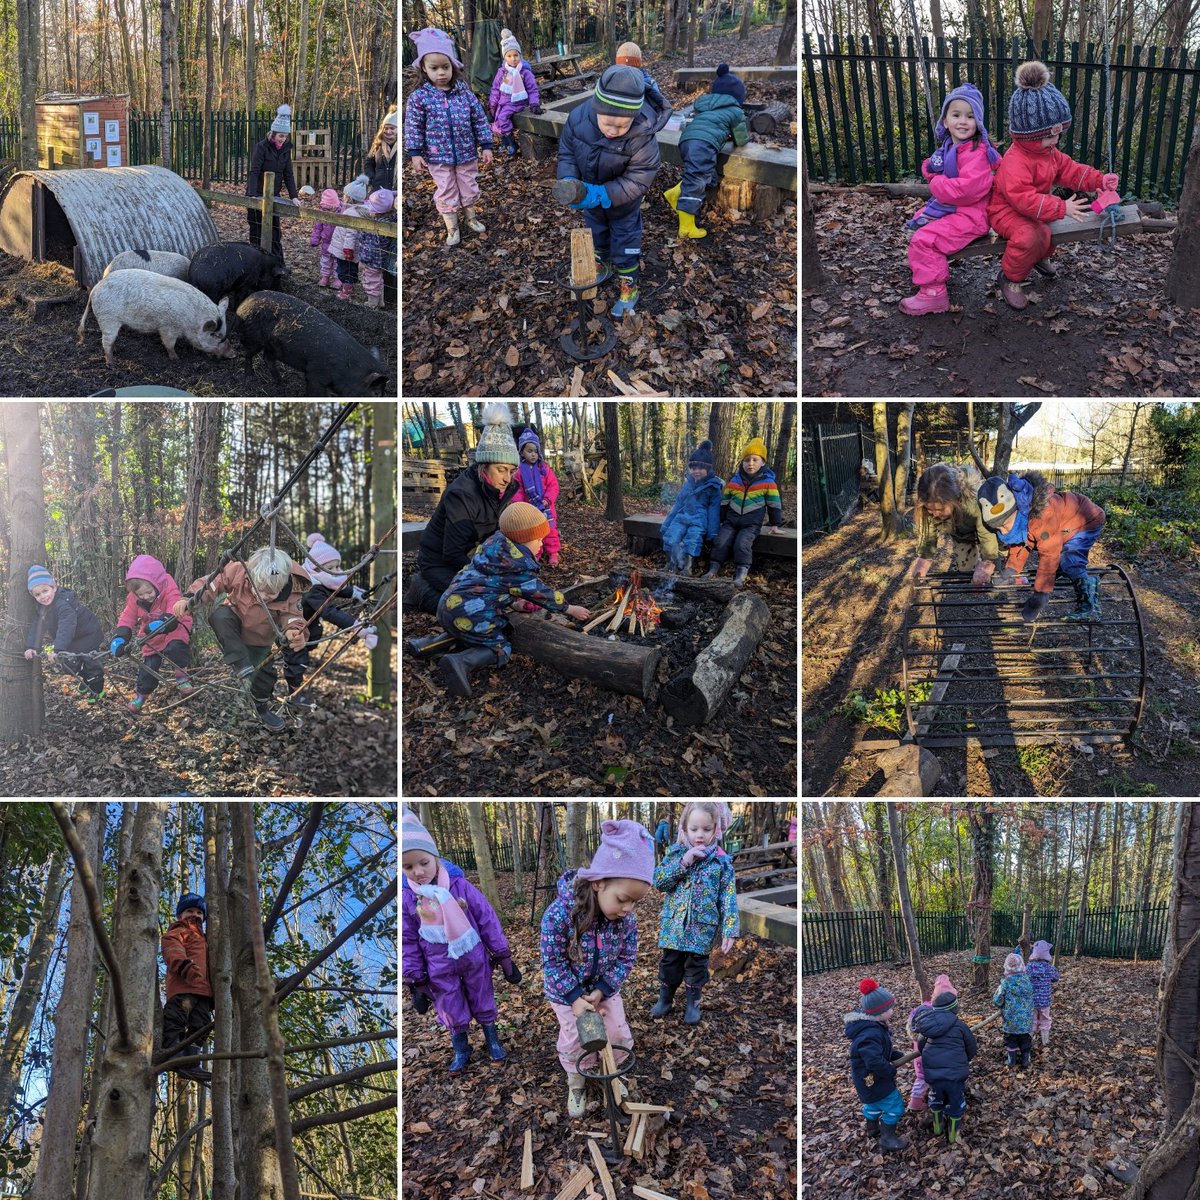 The only thing blue about this Monday was the sky! ☀️🌳 Preschool had a glorious Forest School session; feeding the pigs 🐷 chopping wood 🪓 climbing 🪜 making a fire 🔥 hanging out with friends 🤗 @DanesfieldSchl @DanesfieldFS